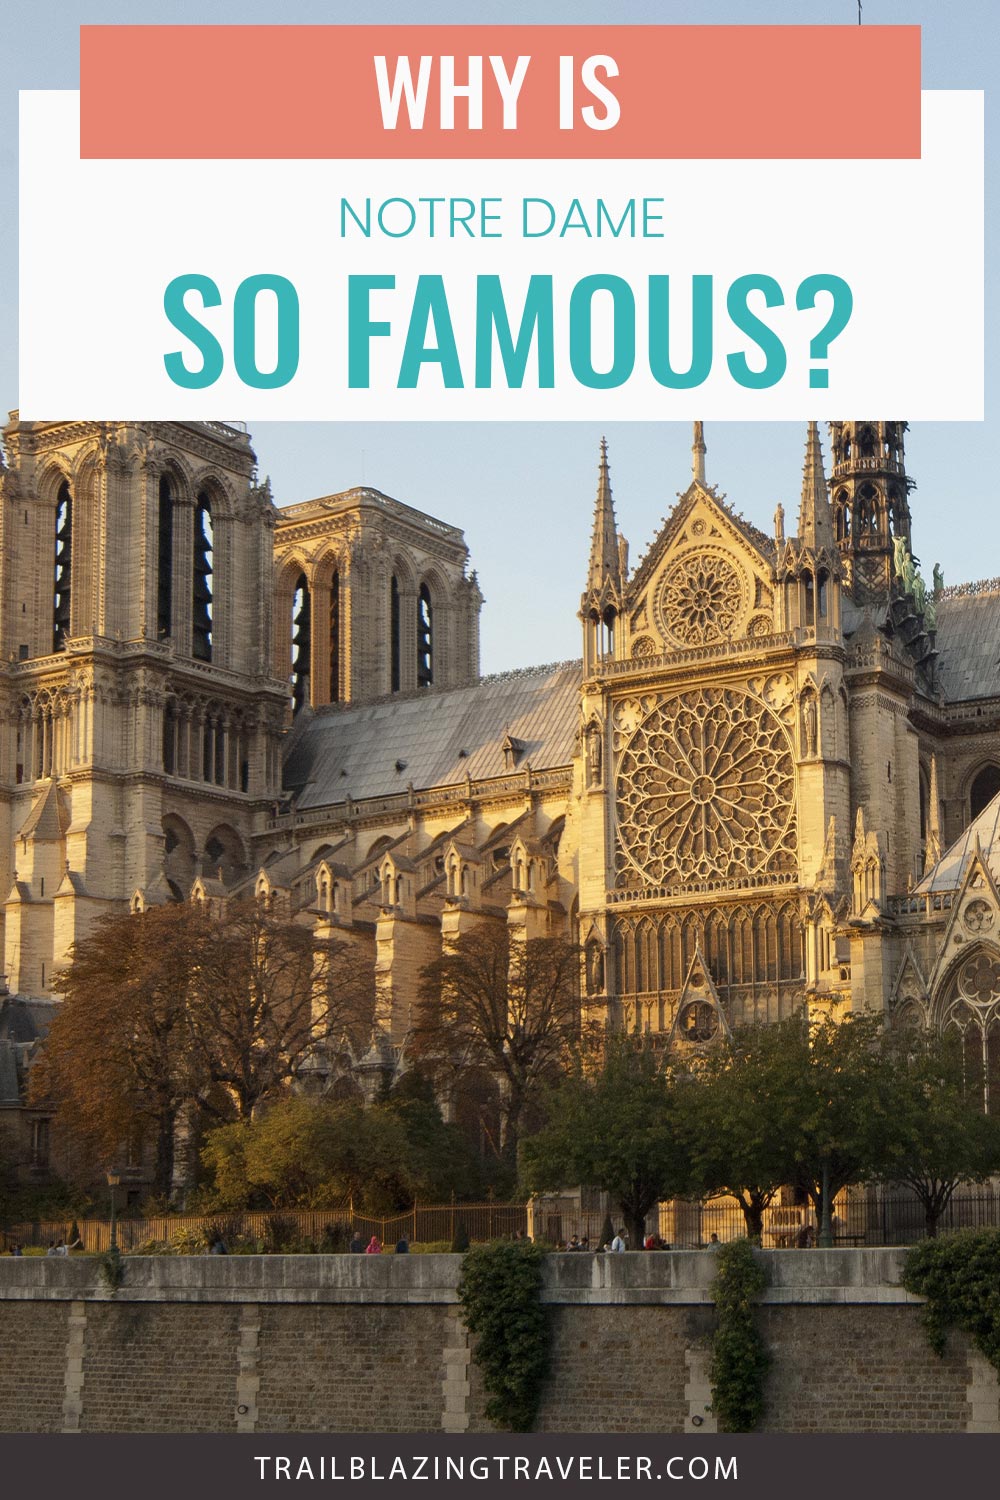 Why Is Notre Dame So Famous?